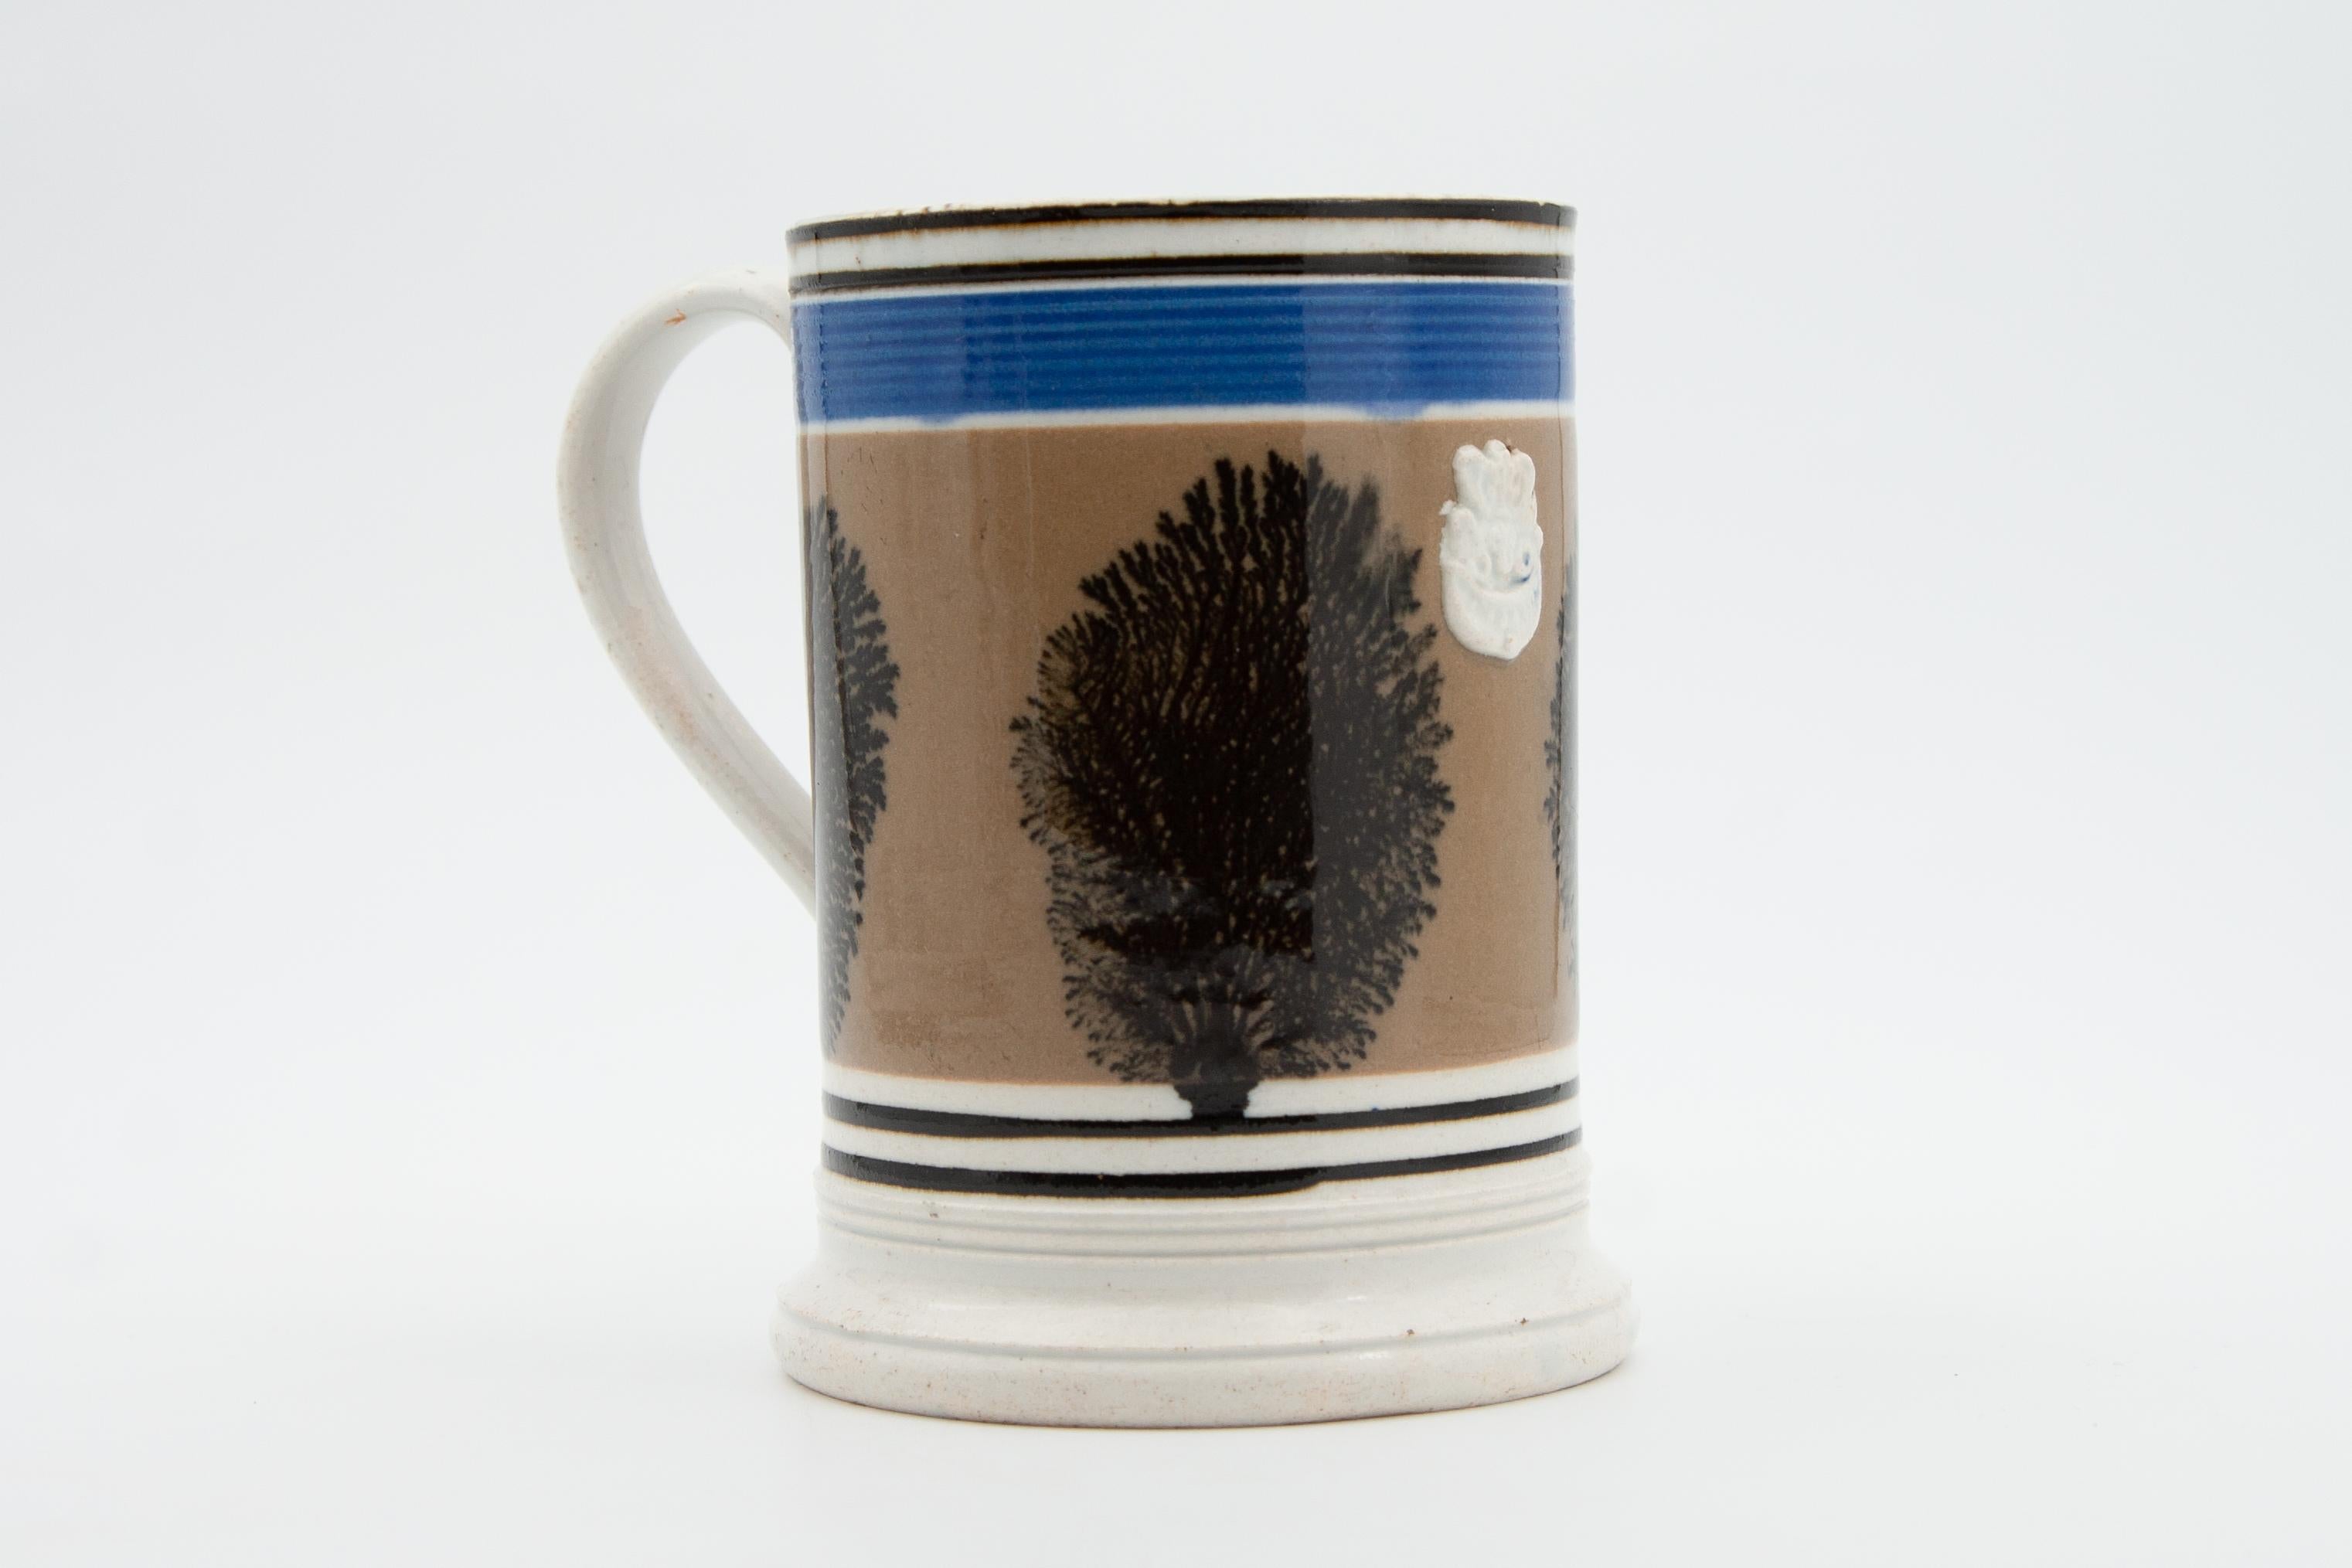 An English Mochaware mug with dendritic or tree decoration, dating to circa 1840.

This large Mochaware mug features rouletted bands of black and blue framing a tree-like pattern (referred to as “algae” or “dendrite”) on a taupe brown background.